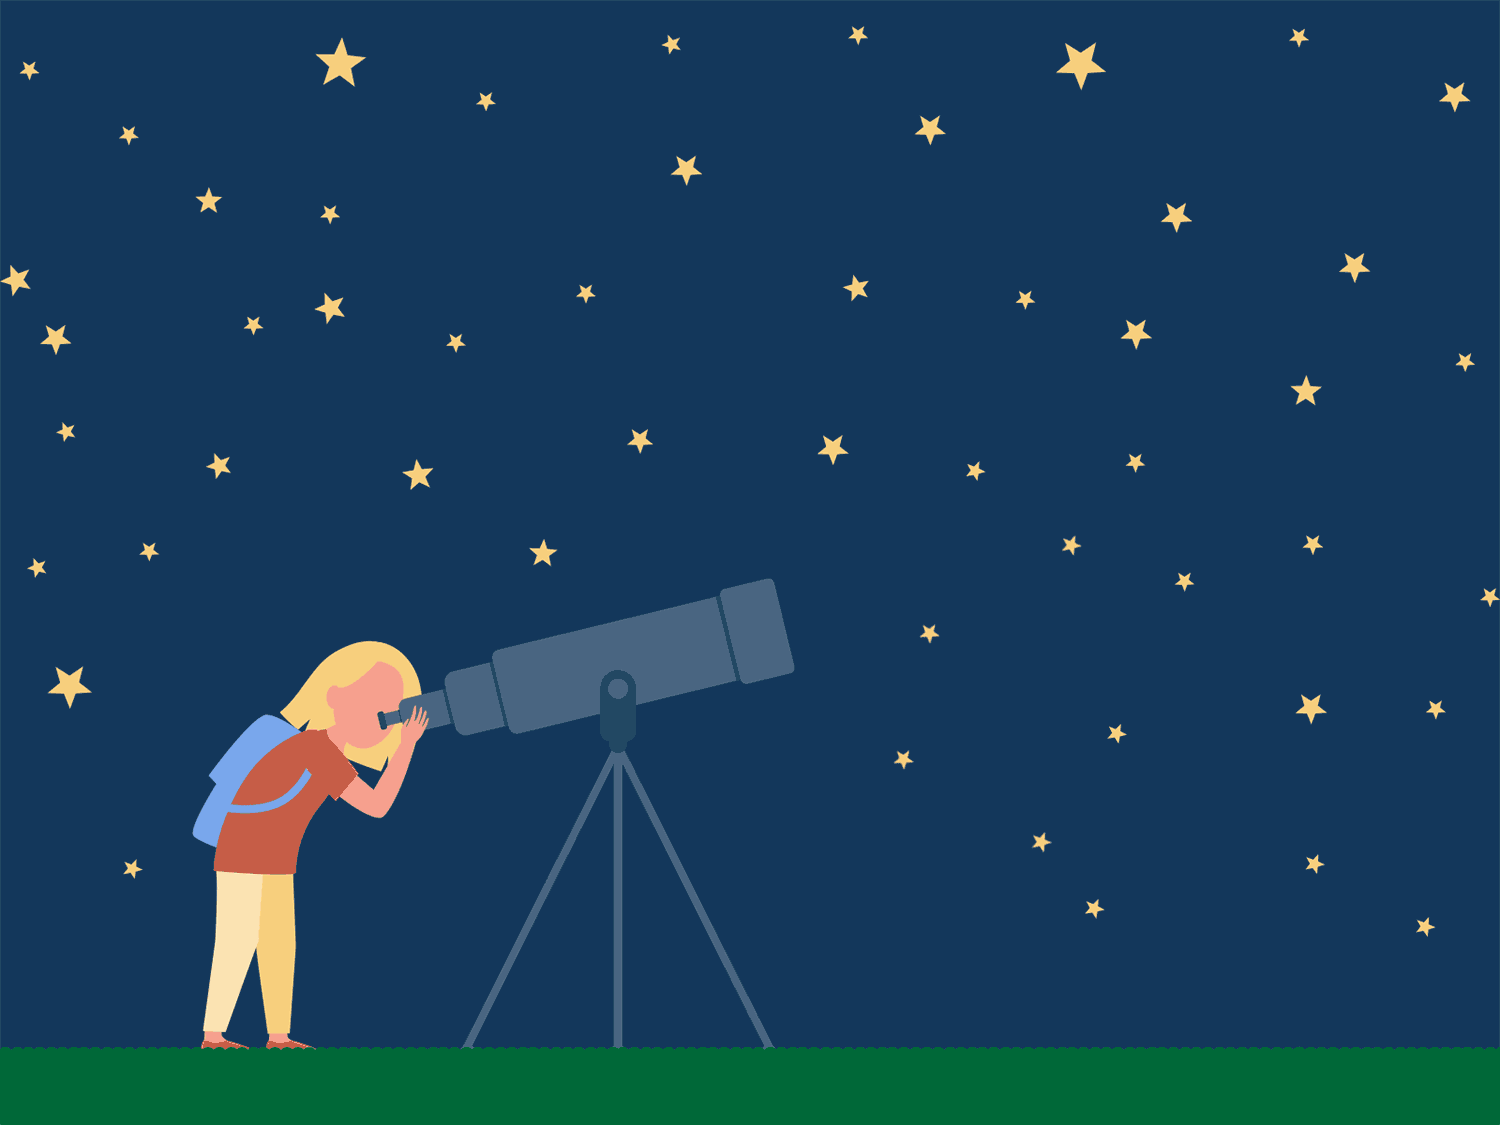 Animated GIF of a girl with a backpack looking through a telescope as a glowing green orb floats in the sky